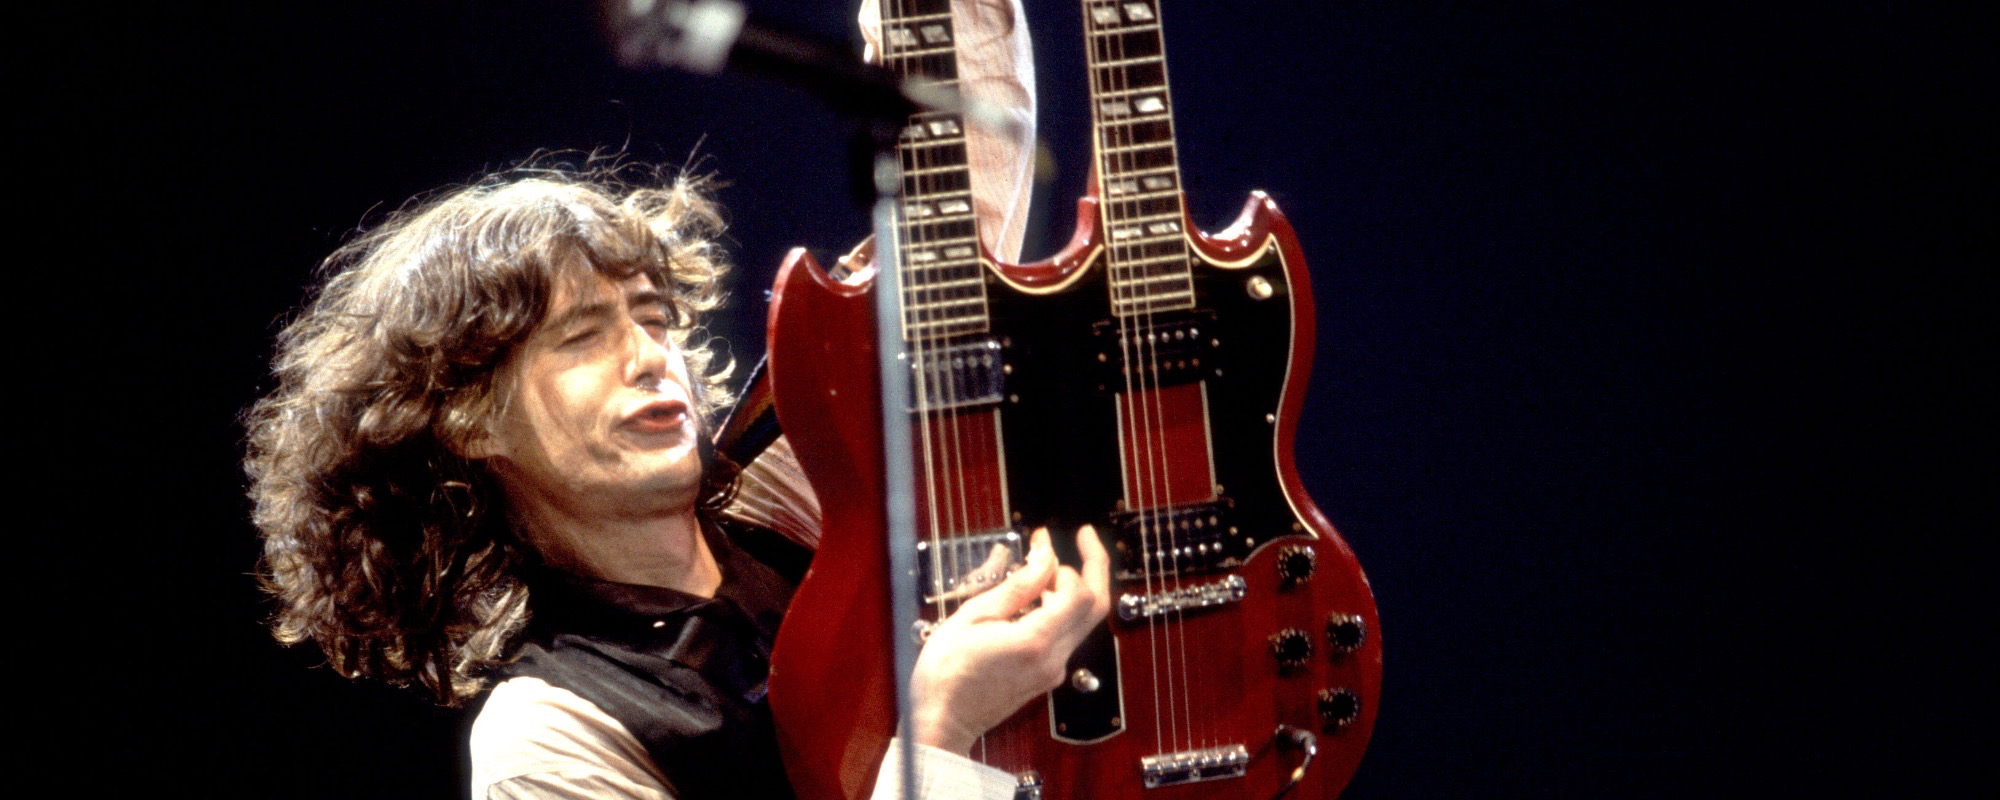 7 Iconic Albums You Didn’t Know Feature Jimmy Page